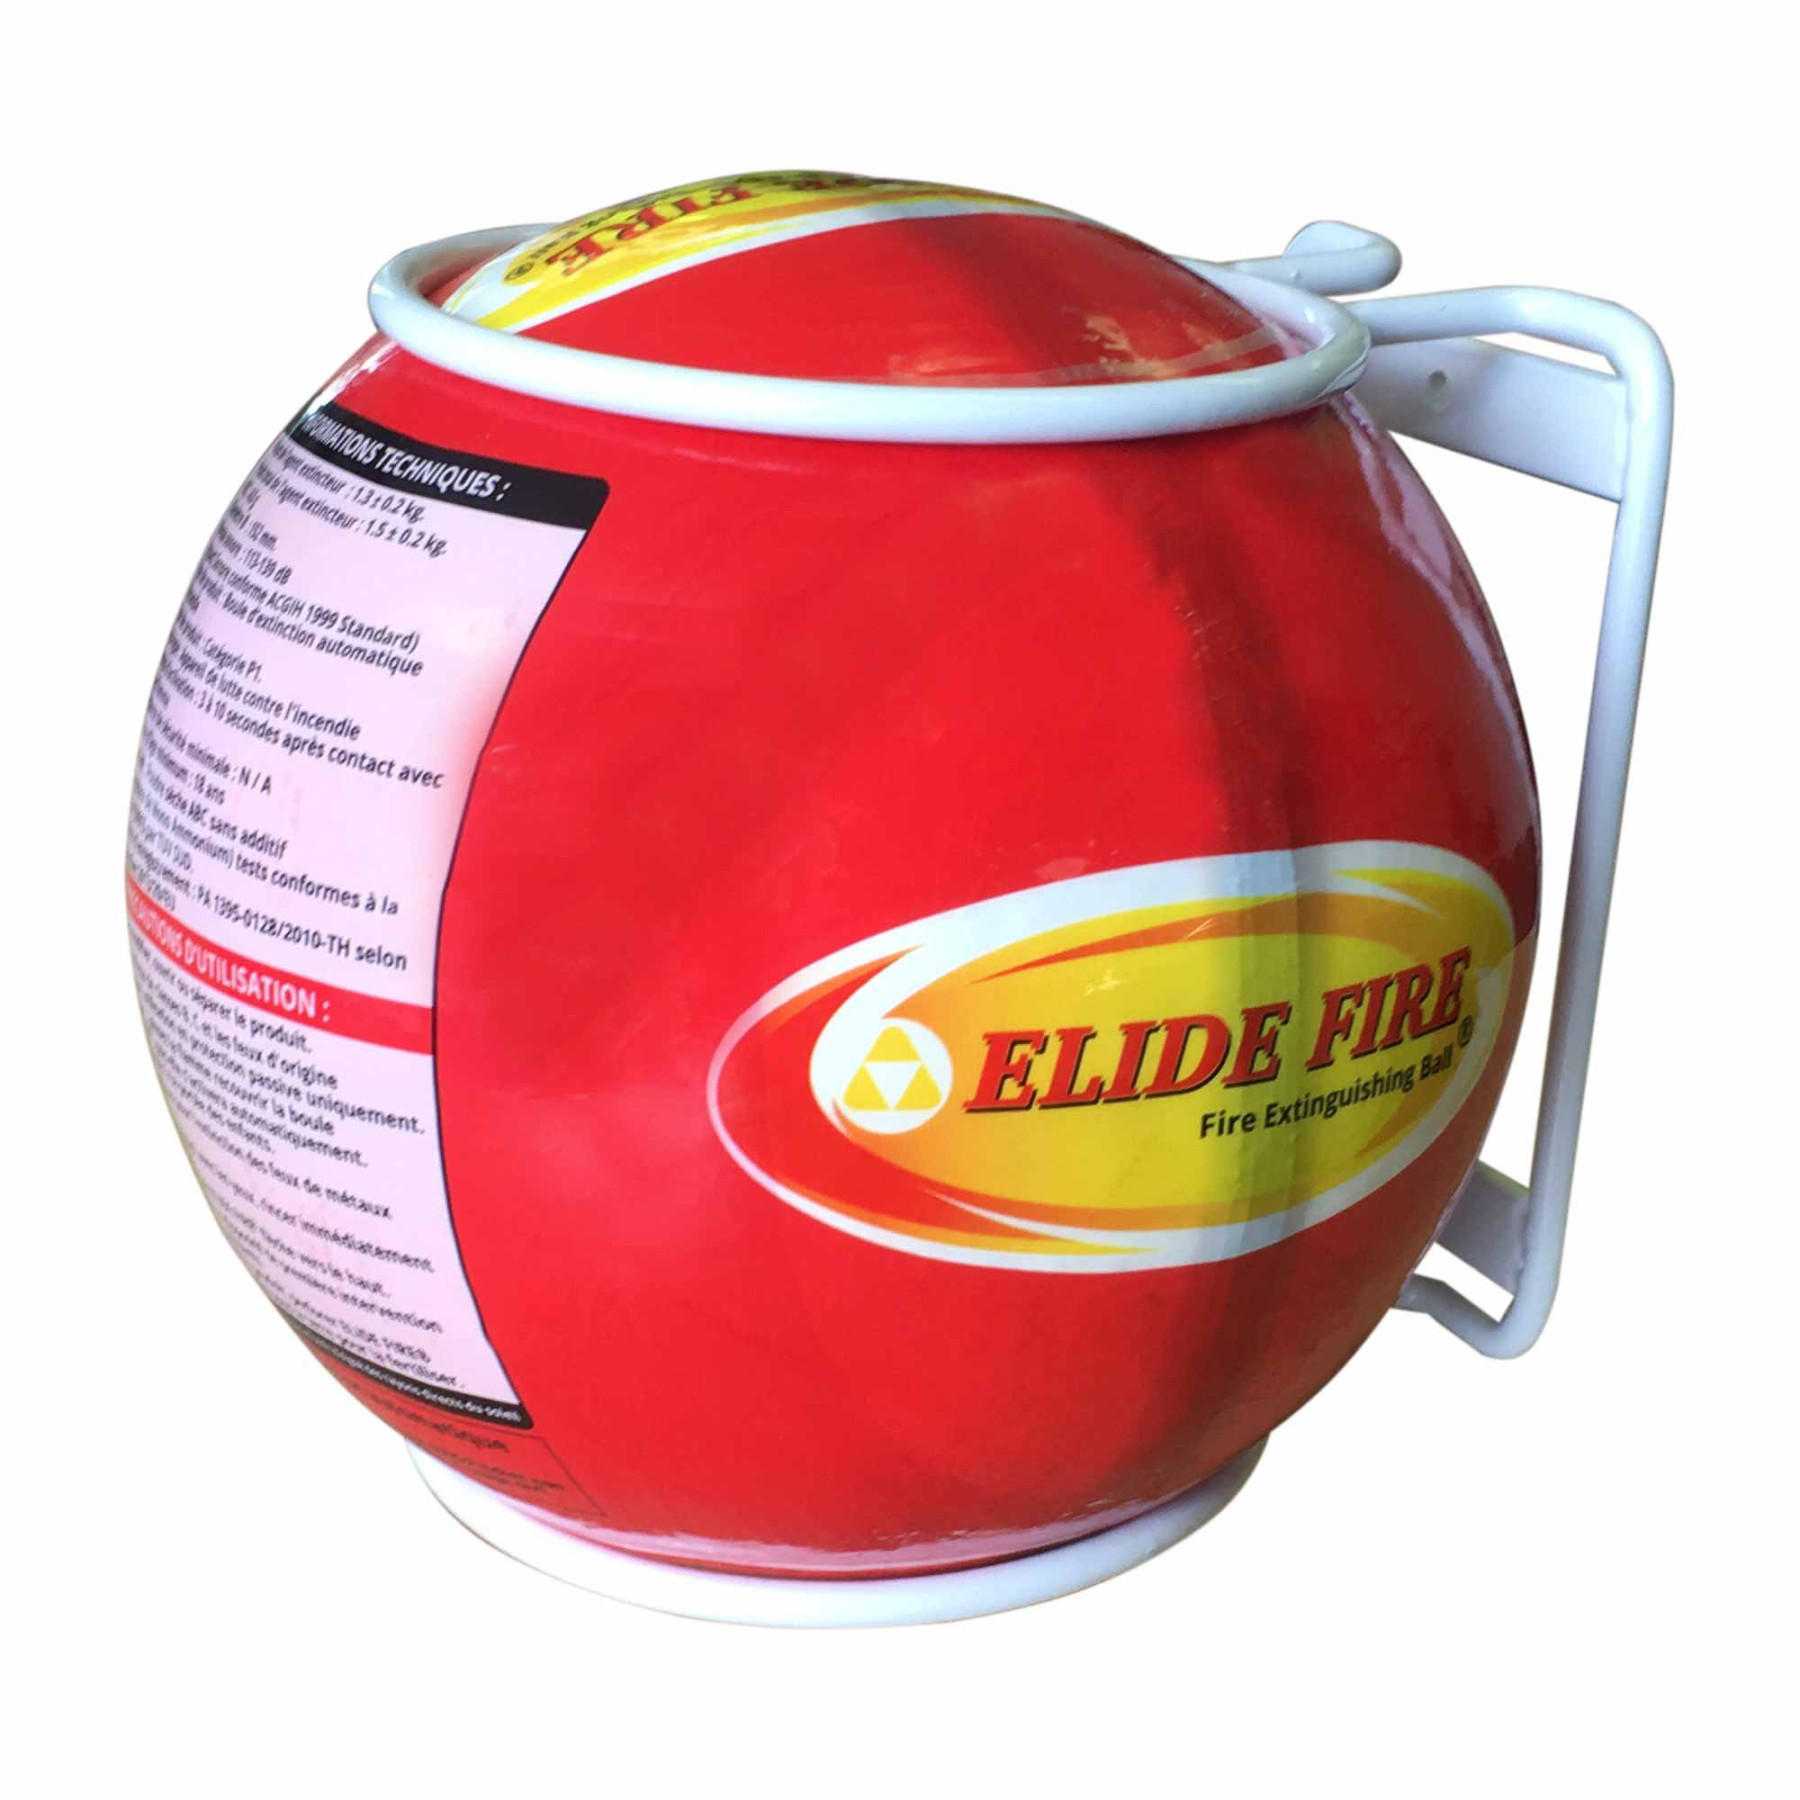 THE REVOLUTIONARY ELIDE FIRE BALL🔥. The Elide Fire Ball is a